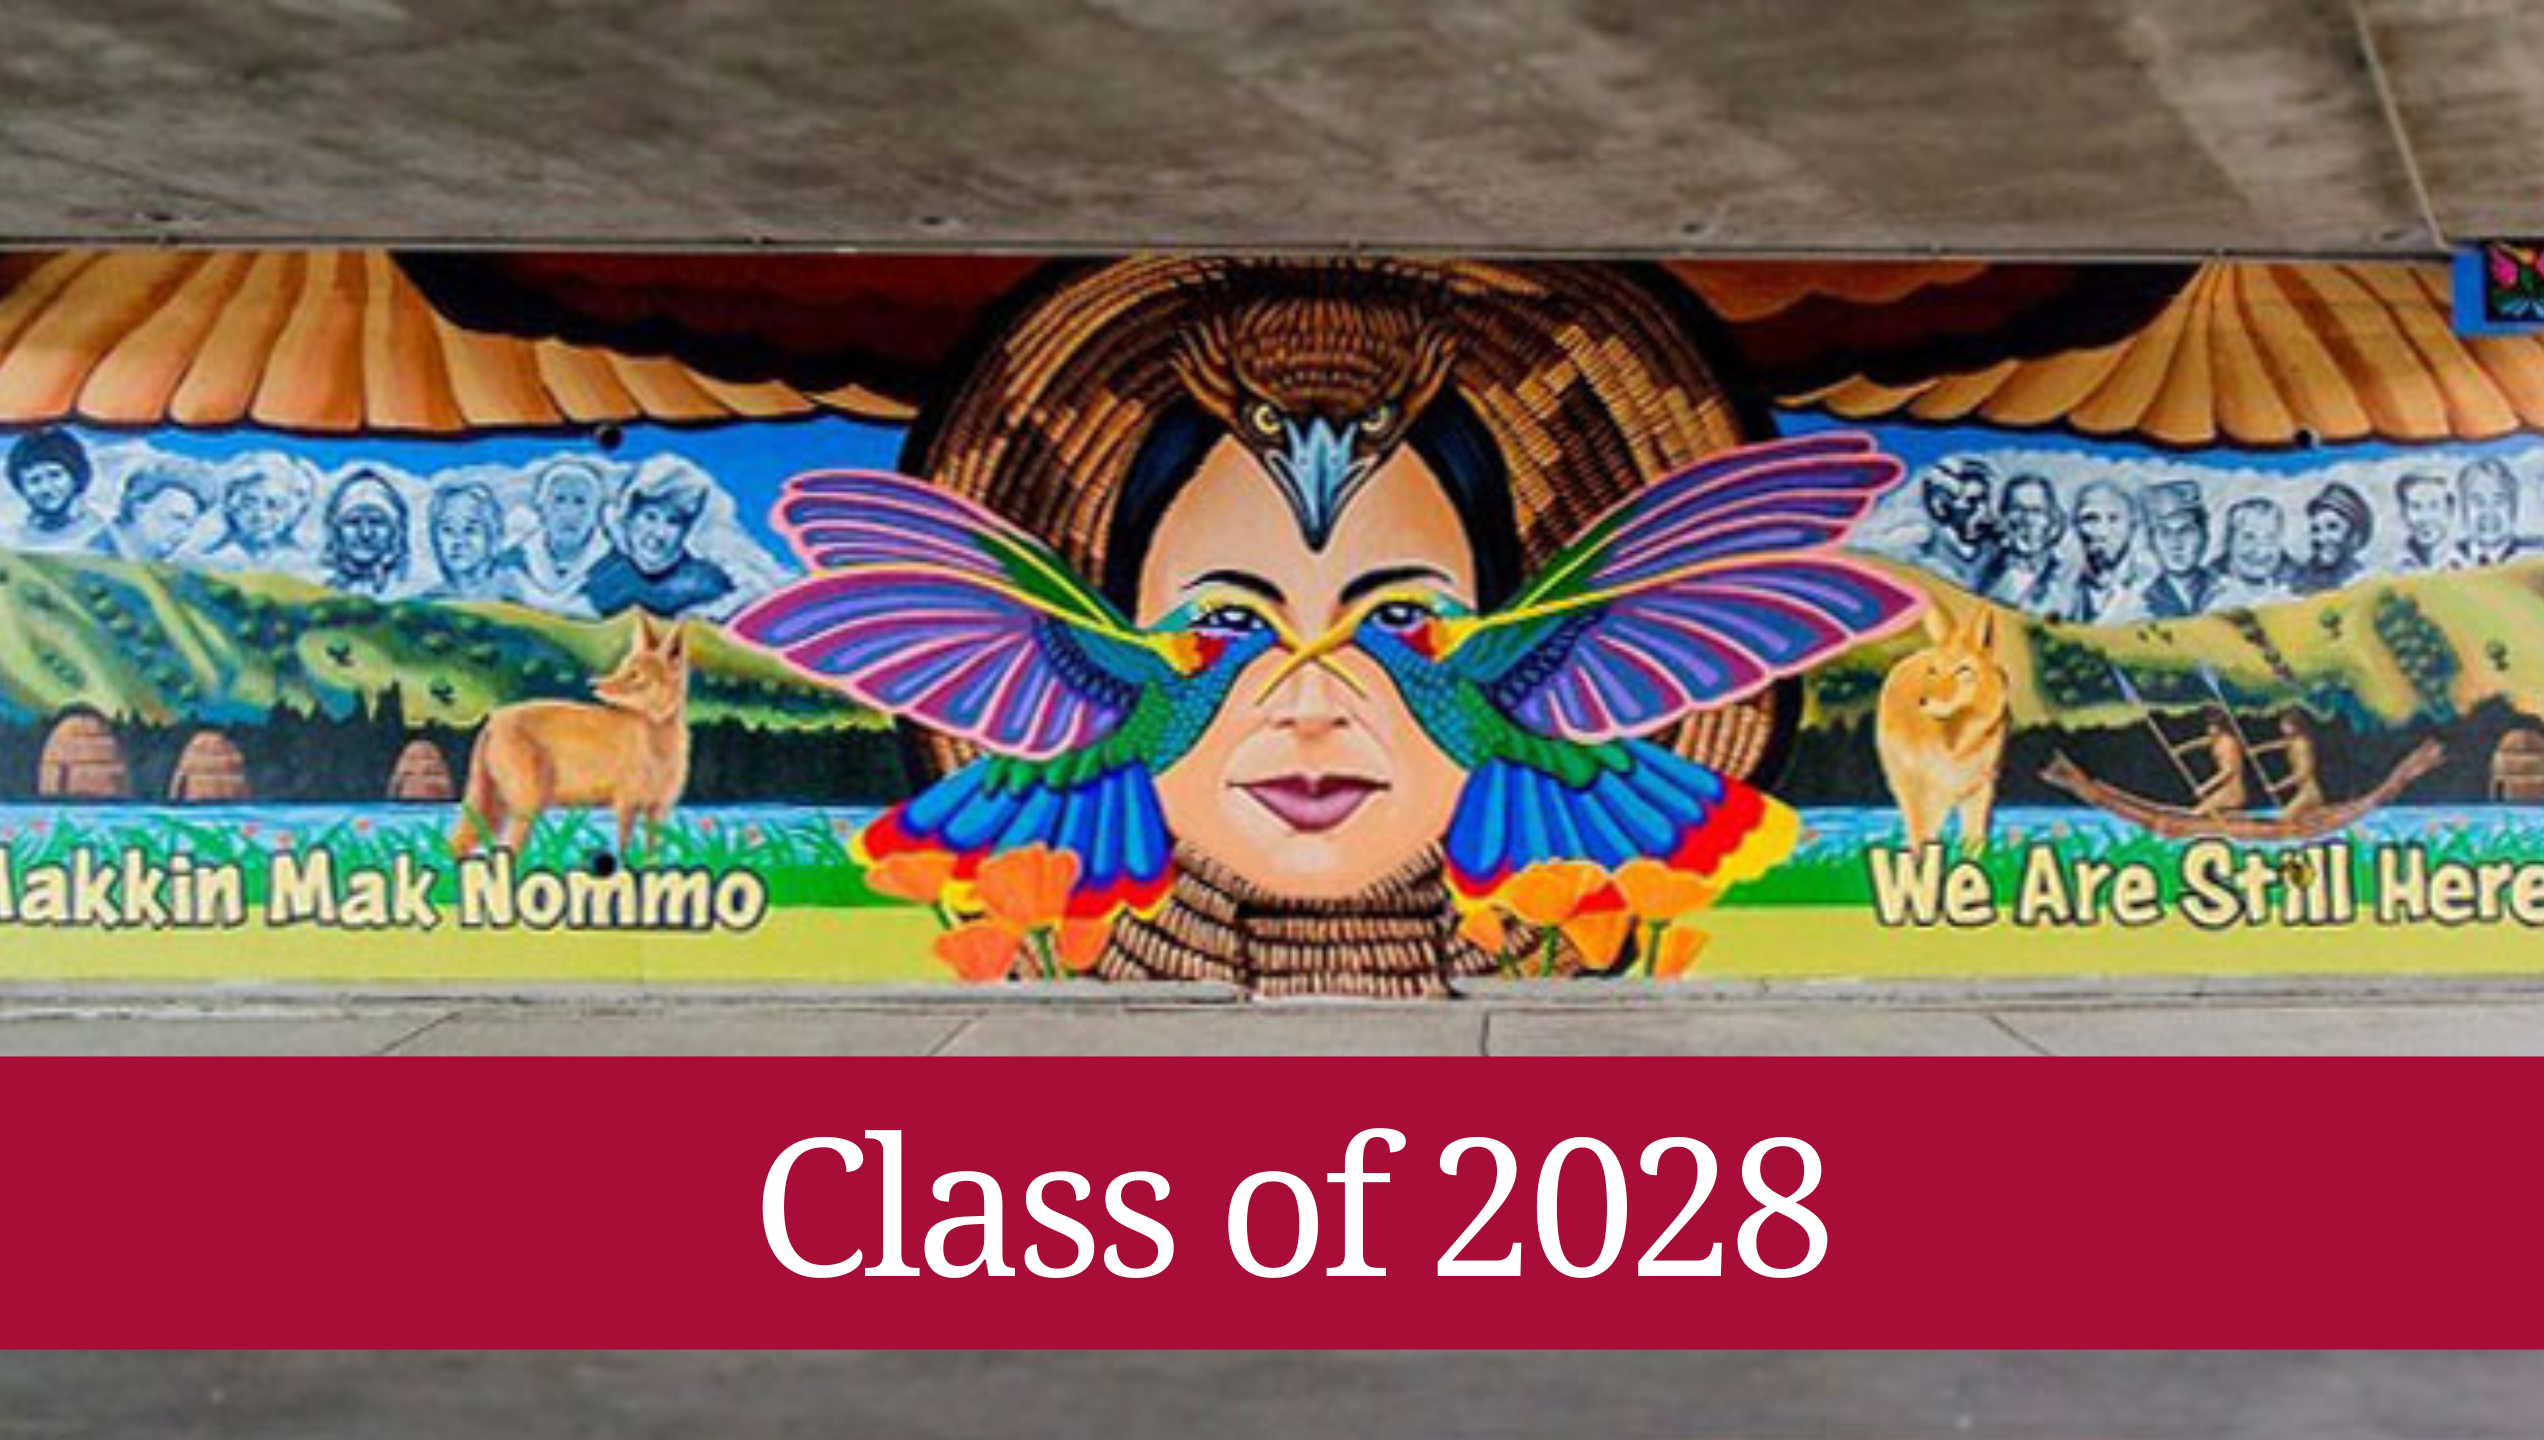 Class of 2026 First Year Immersion Bay Area - San Jose mural under overpass 